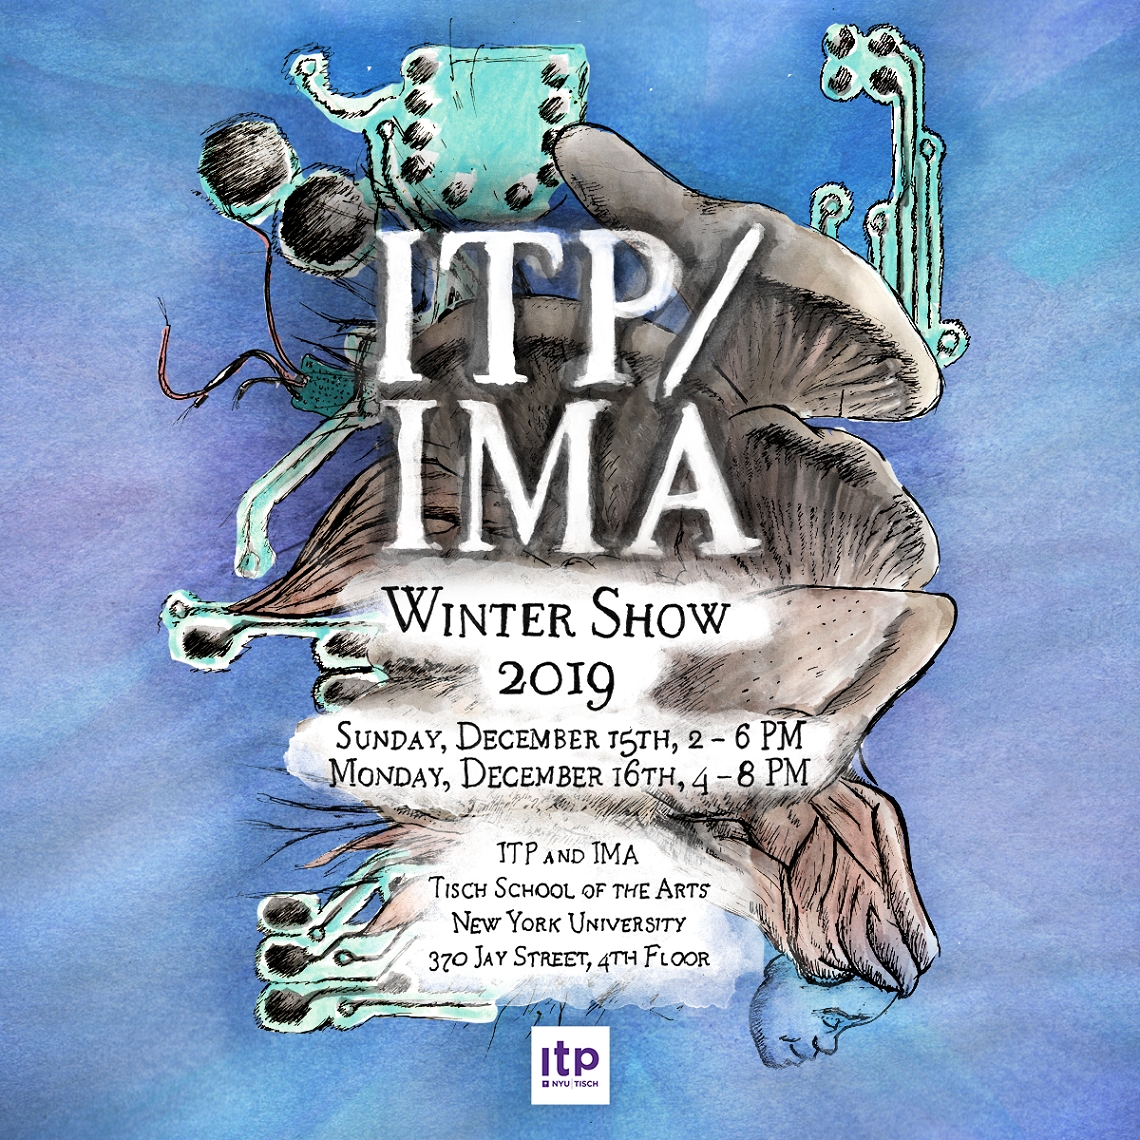 Image of ITP/IMA Winter Show 2019 Poster.